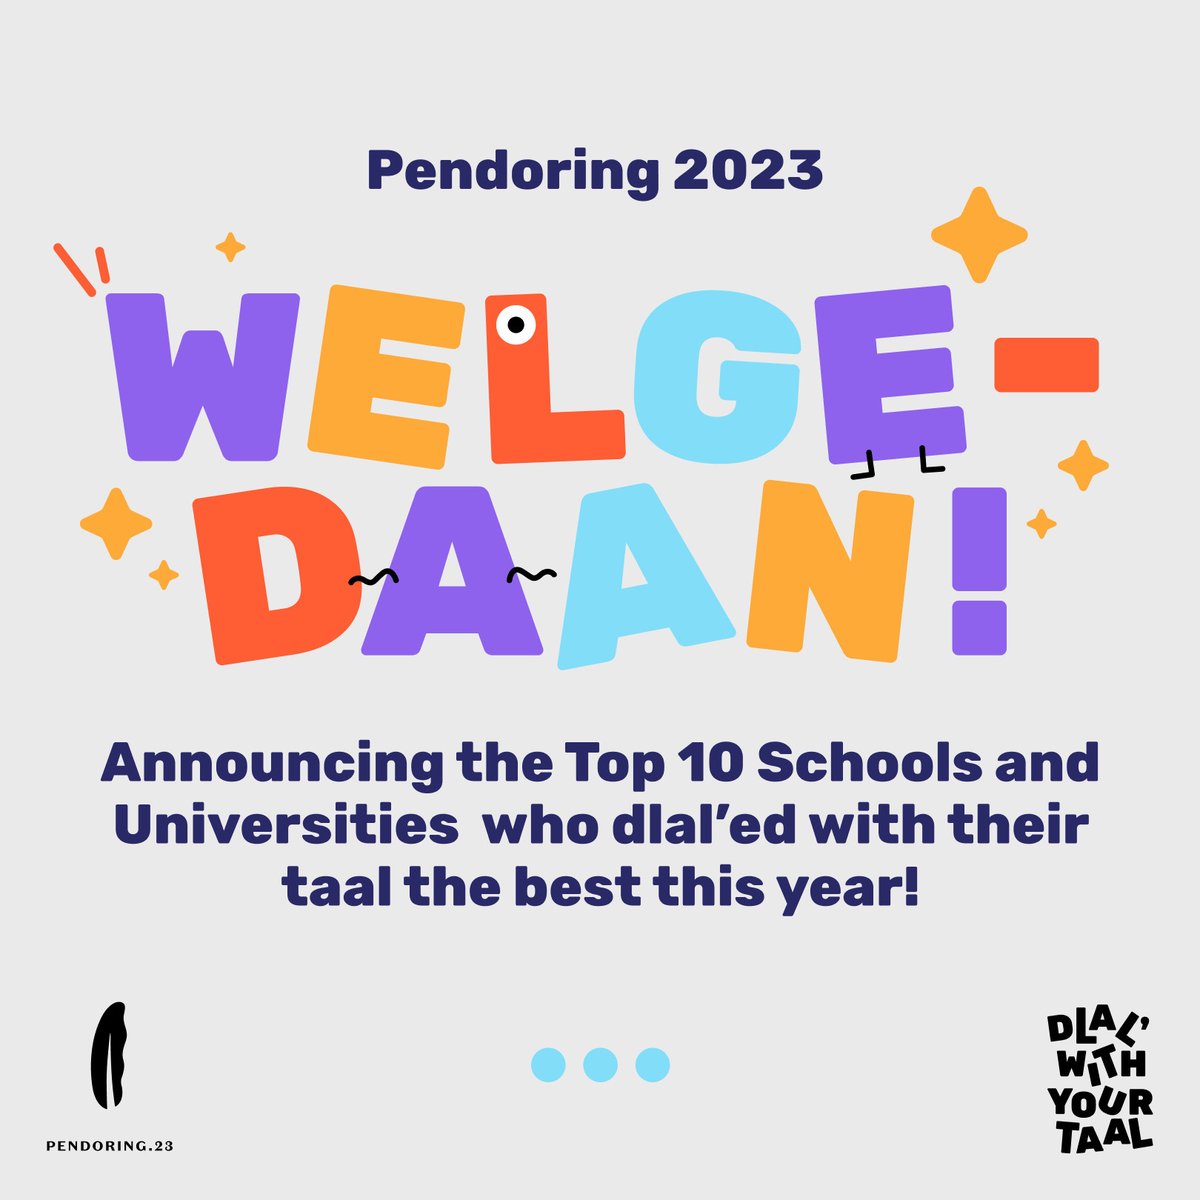 Congratulations to the Top  10 Schools and Universities of #Pendoring2023.

6. The Open Window
7. @gdesigncenter
8. @theNWU
9. @AAAschool
10. Stellenbosch Academy

You can order additional trophies or certificates before 8 December 2023 here: bit.ly/3t2i4B5